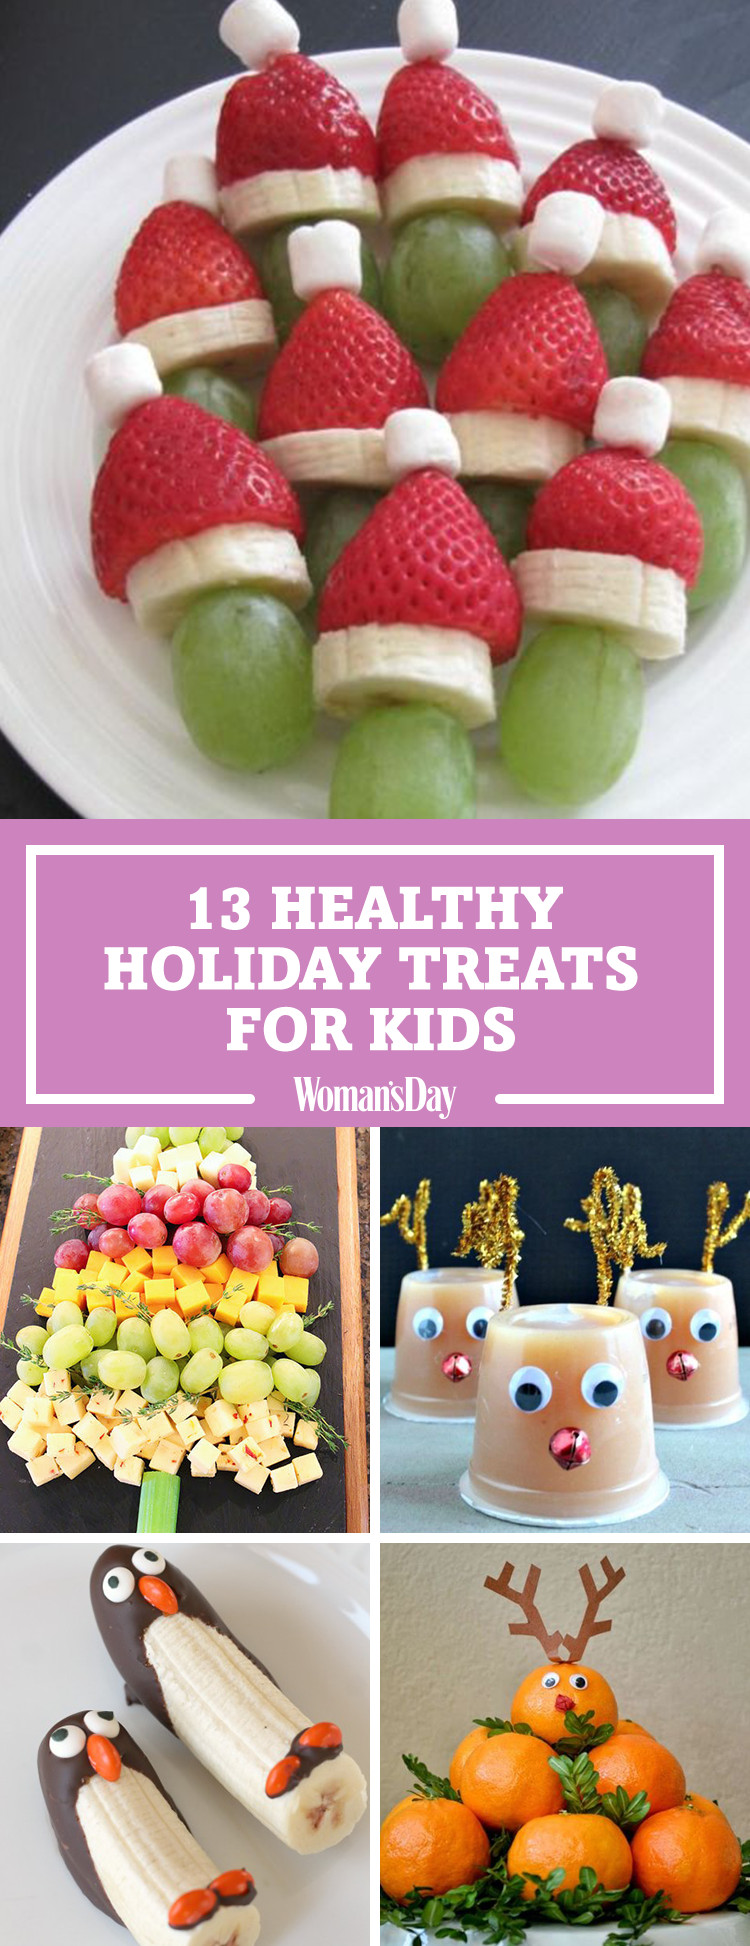 Fun Christmas Appetizers
 17 Healthy Christmas Snacks for Kids Easy Ideas for